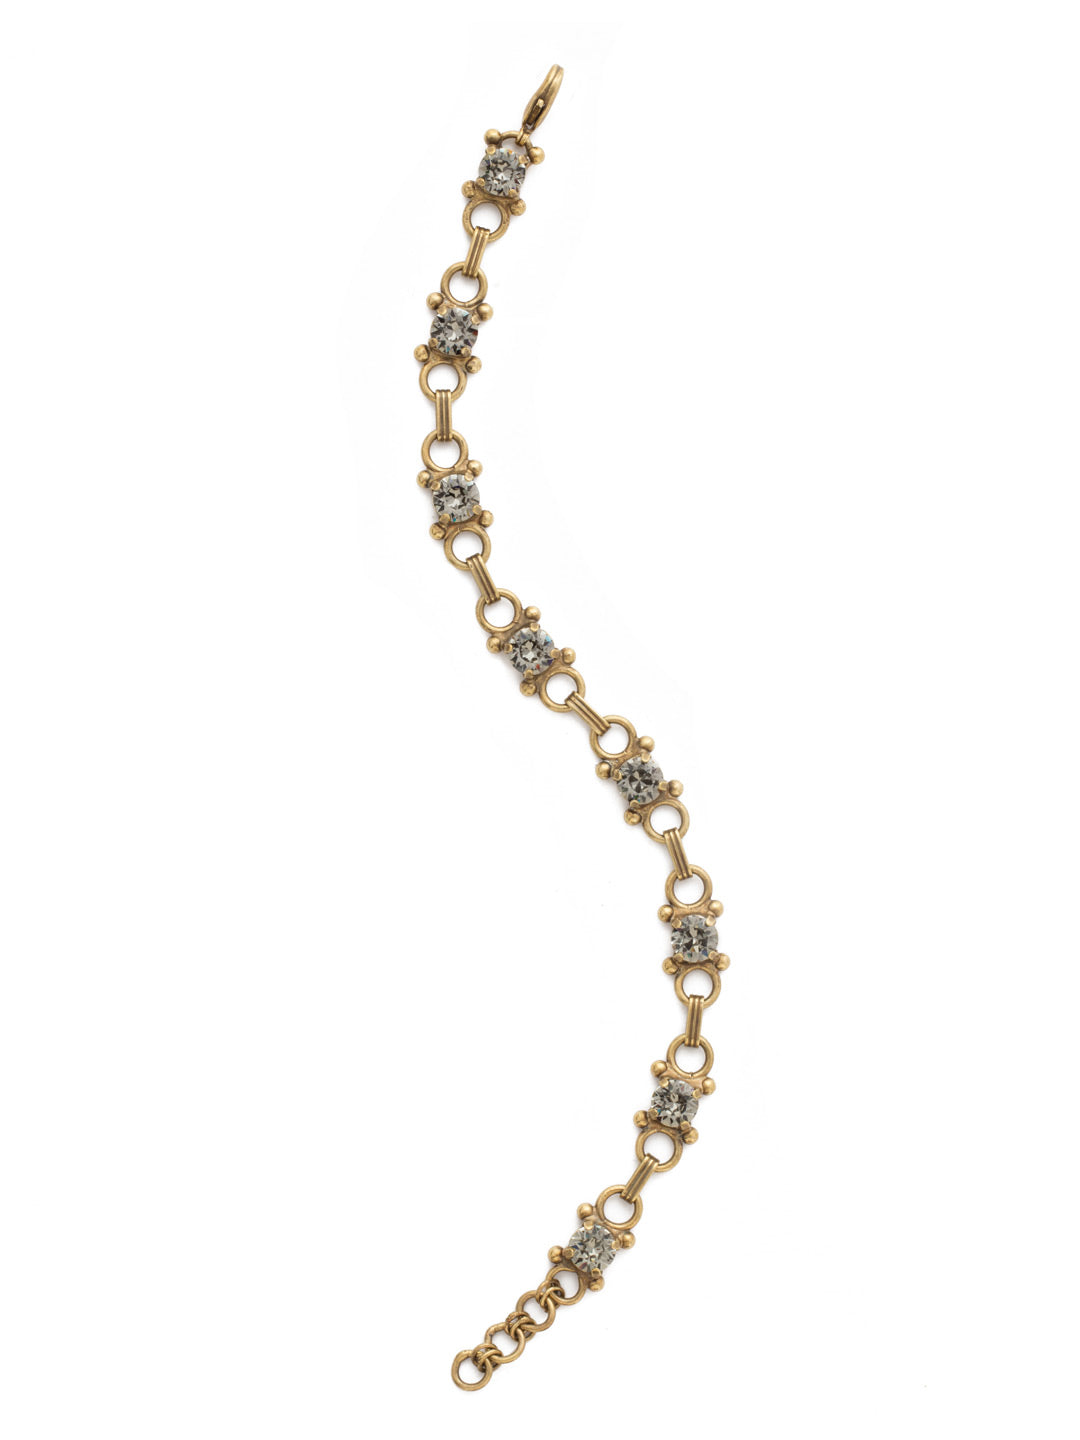 Mini Eyelet Line Bracelet - BDH5AGBD - <p>Our mini Eyelet Line Bracelet offers a classic design with edgy elements. Add this line bracelet to any look for just enough sparkle. From Sorrelli's Black Diamond collection in our Antique Gold-tone finish.</p>